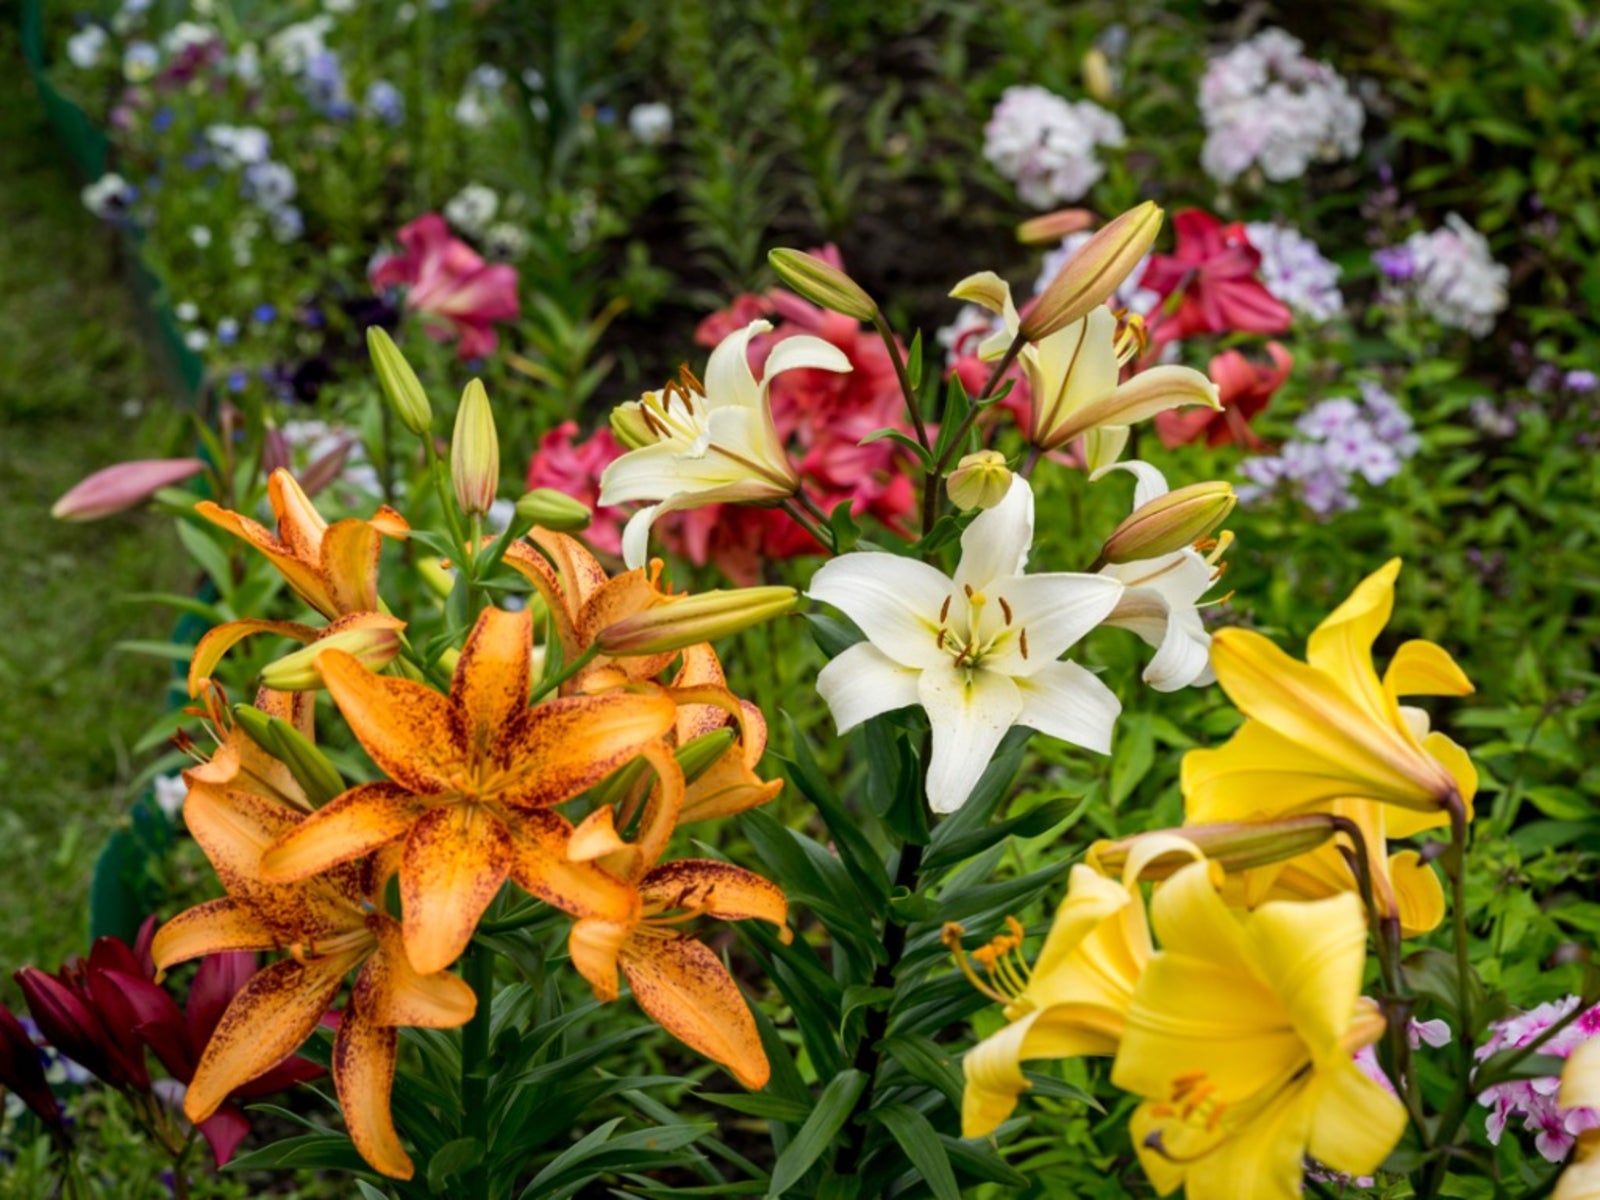 Lily Plant Companions - Learn About Companion Planting With Lily